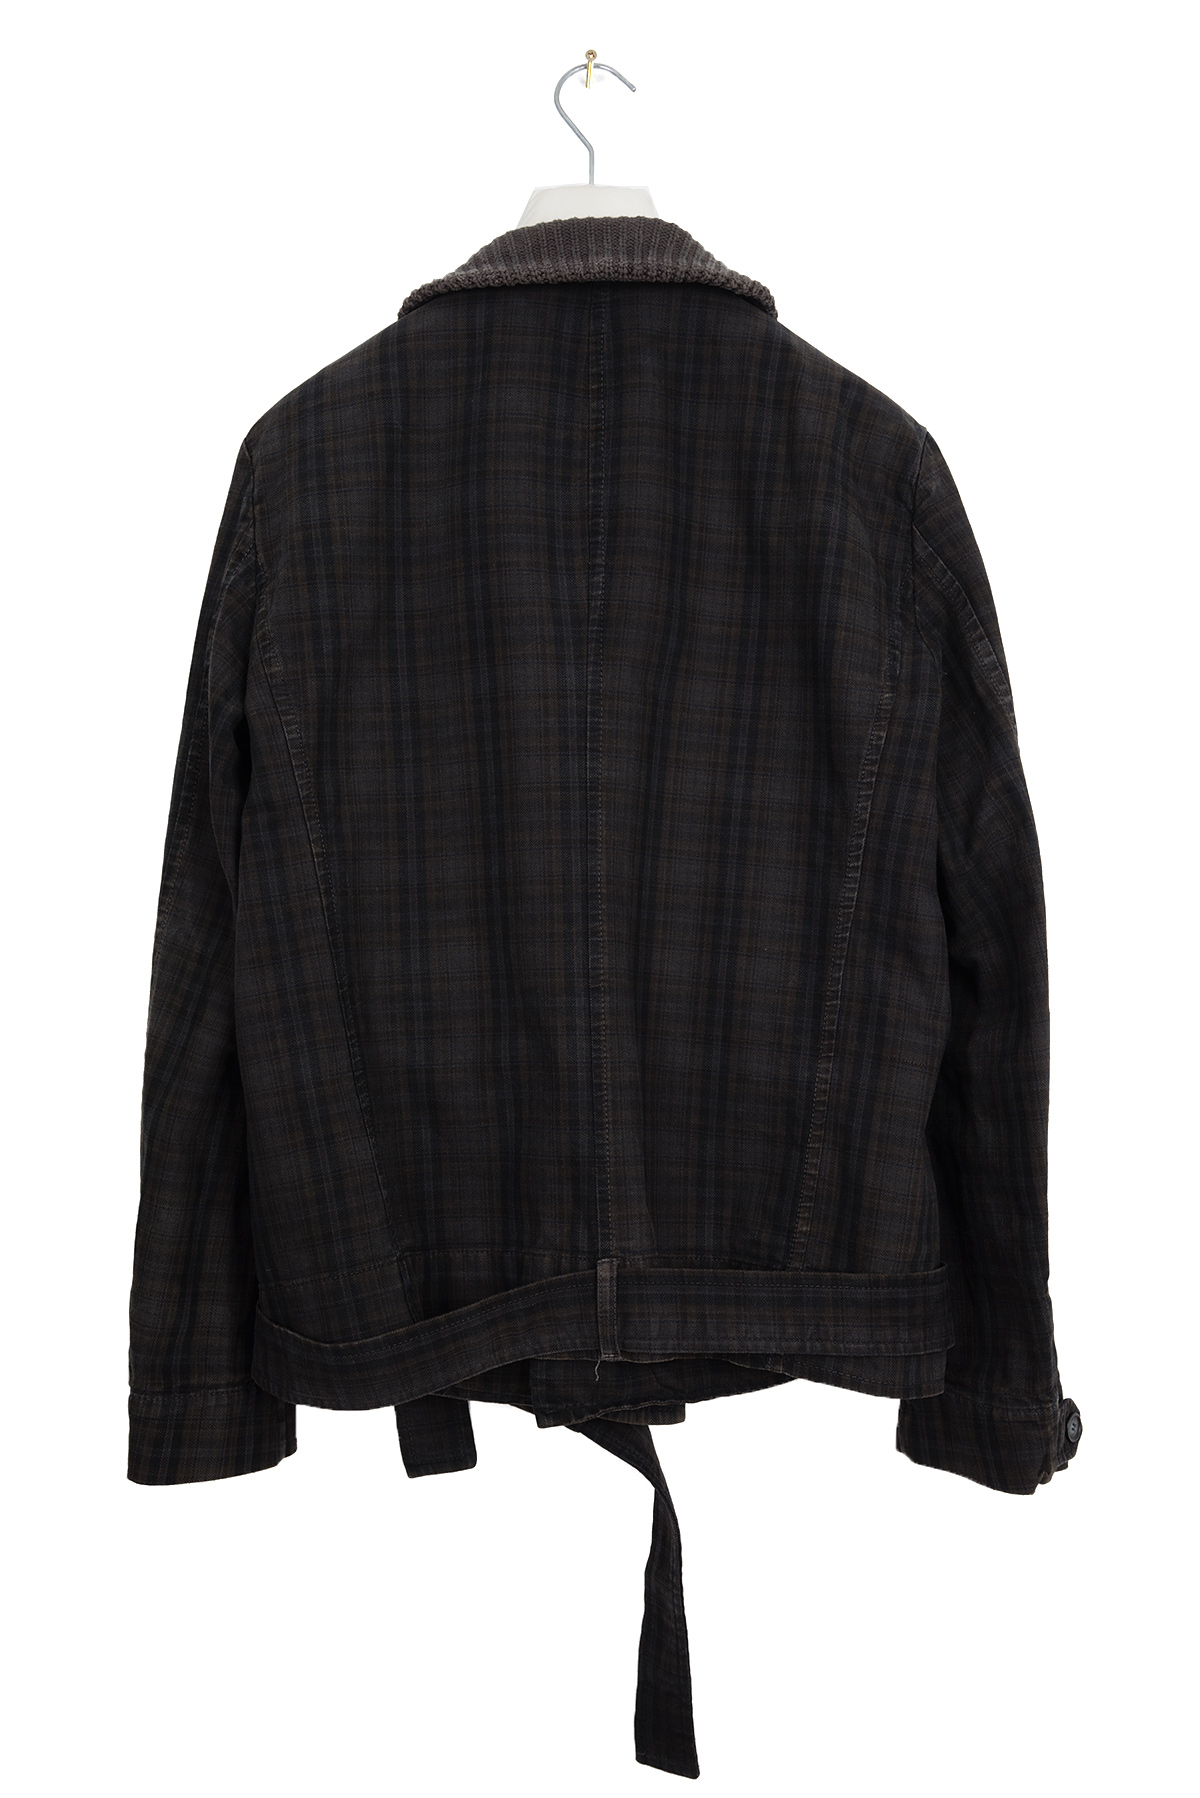 2006 A/W SHAWL COLLAR JACKET IN OVERDYED COTTON - 7